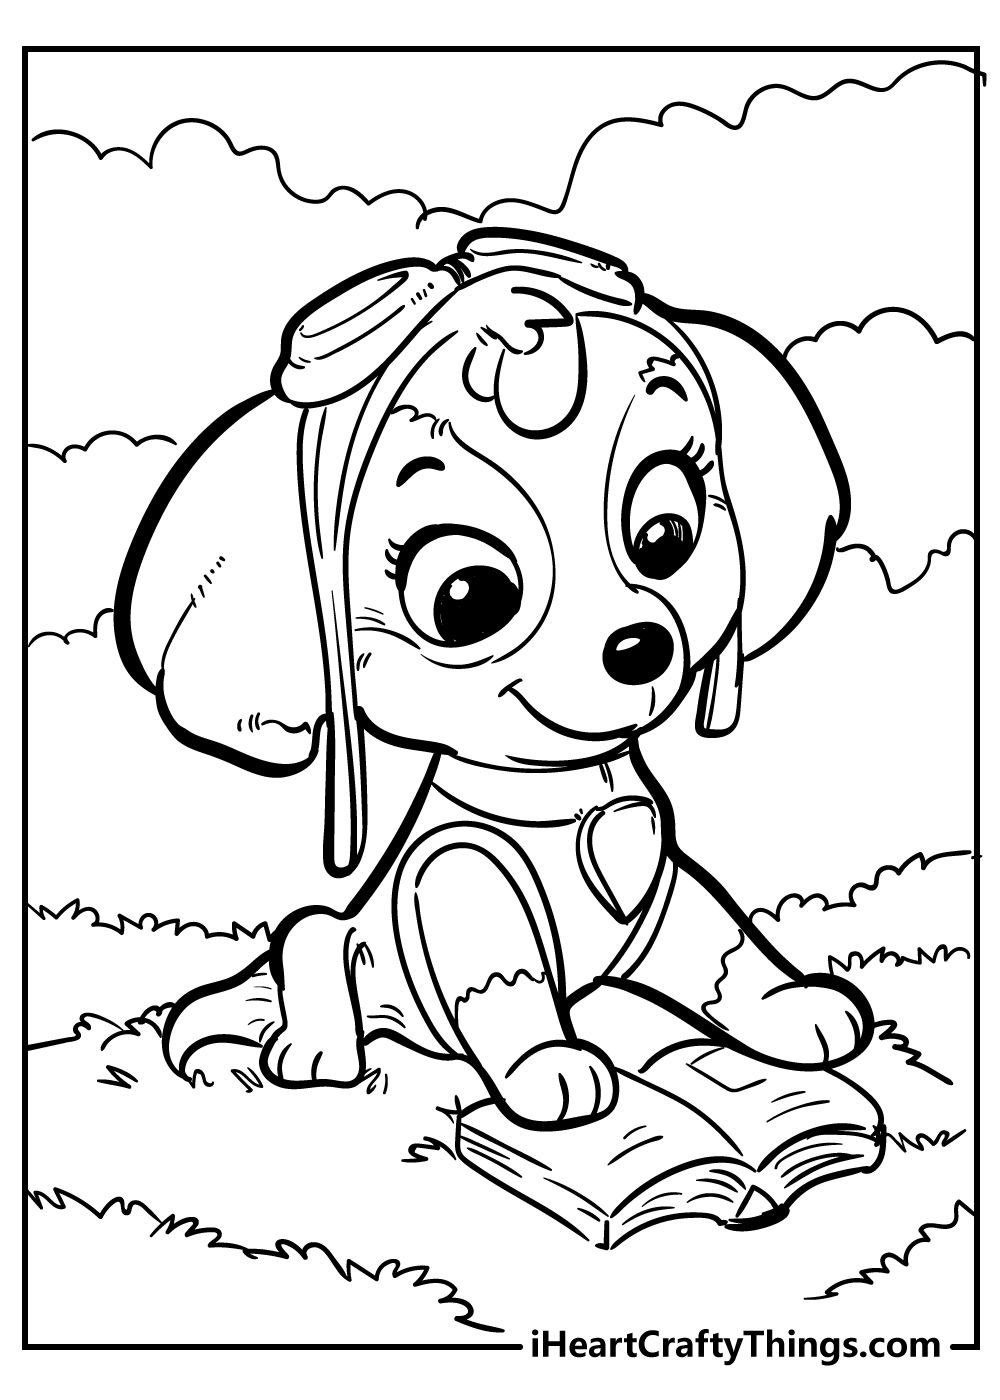 Paw Patrol Coloring Pages FREE Printable 7